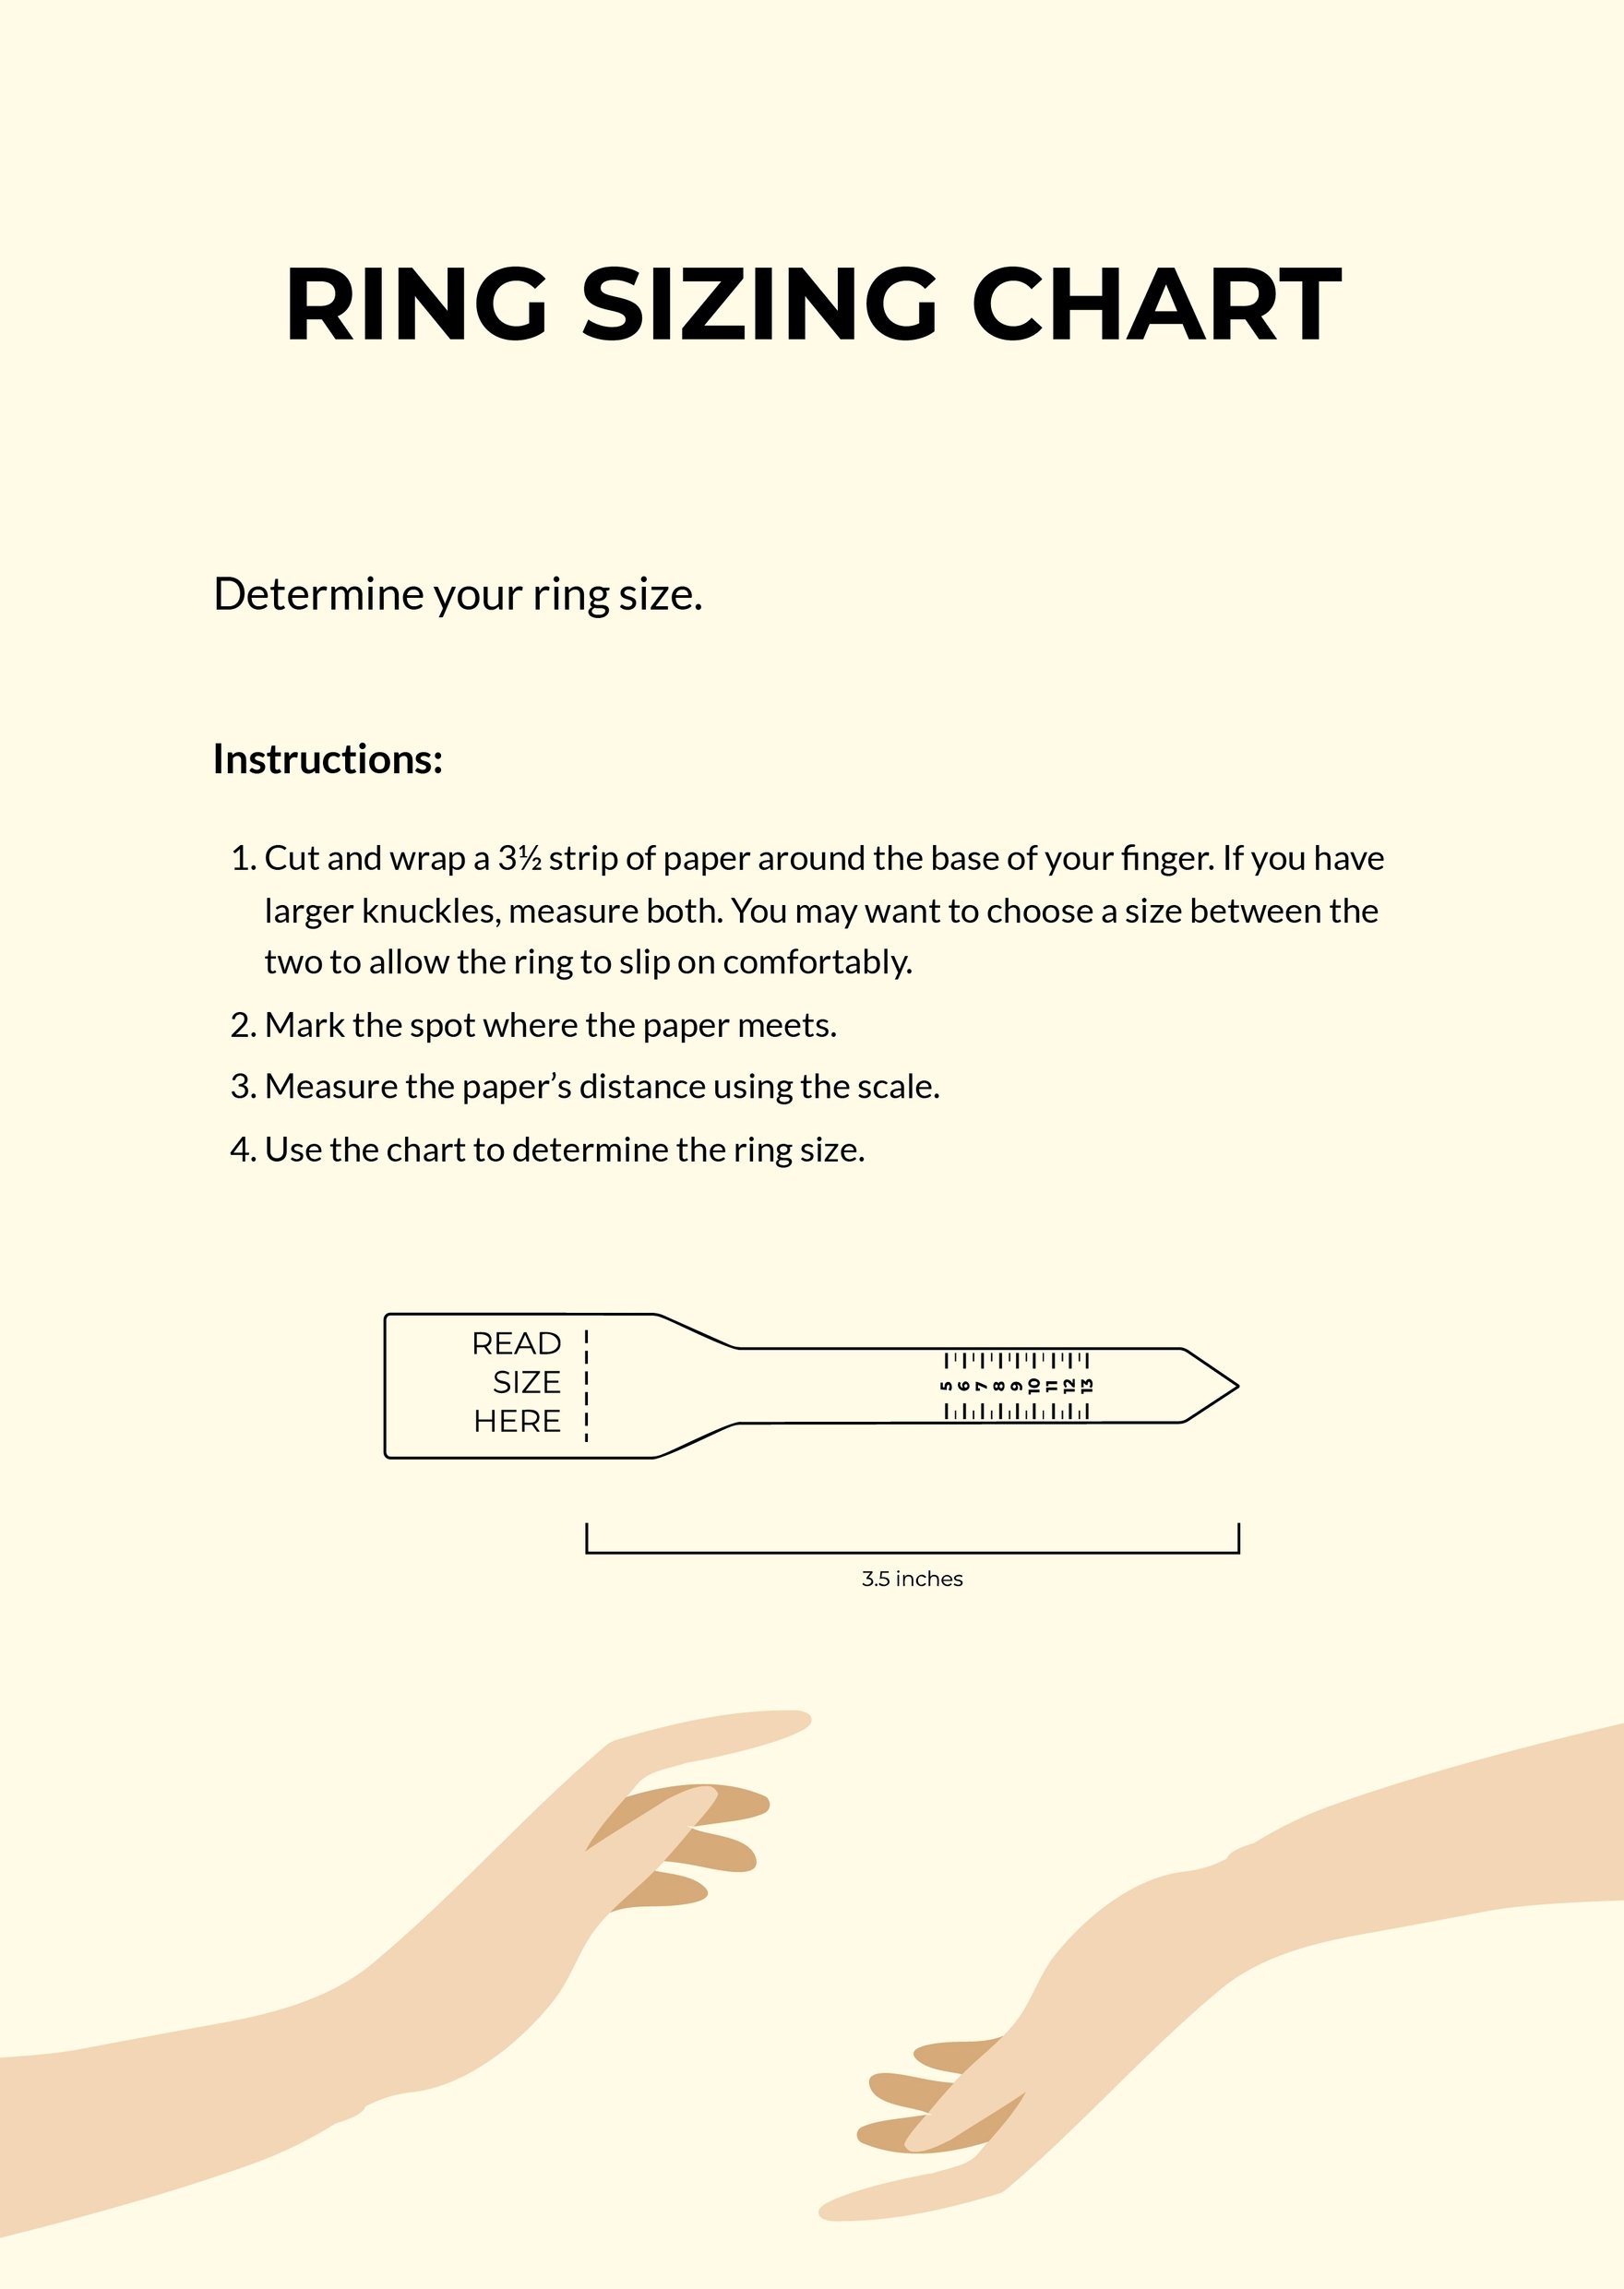 Ring Sizing Chart Template in PDF, Illustrator